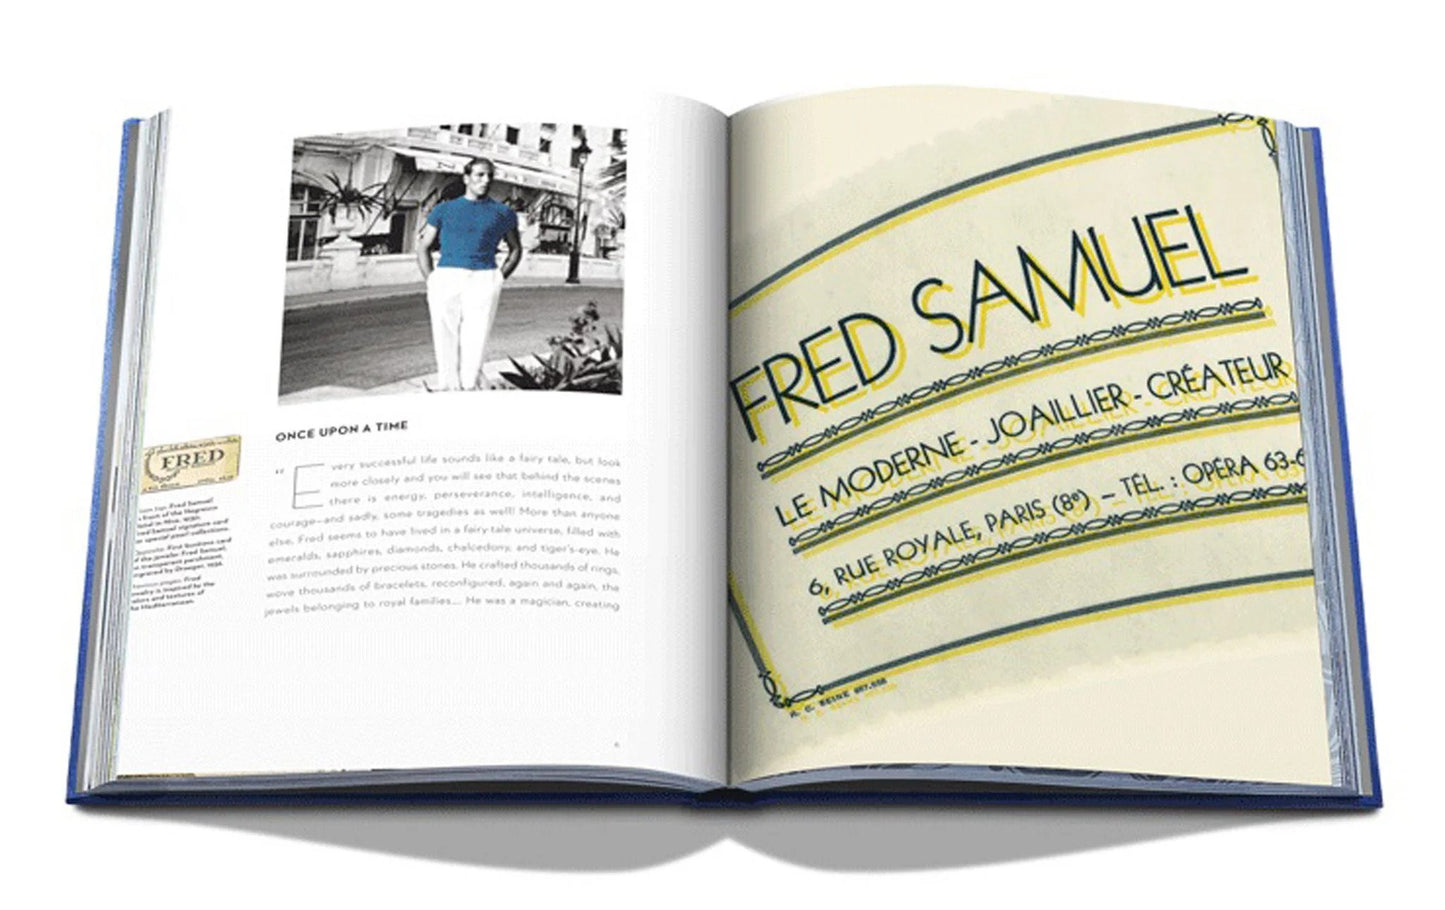 Fred Book | Assouline